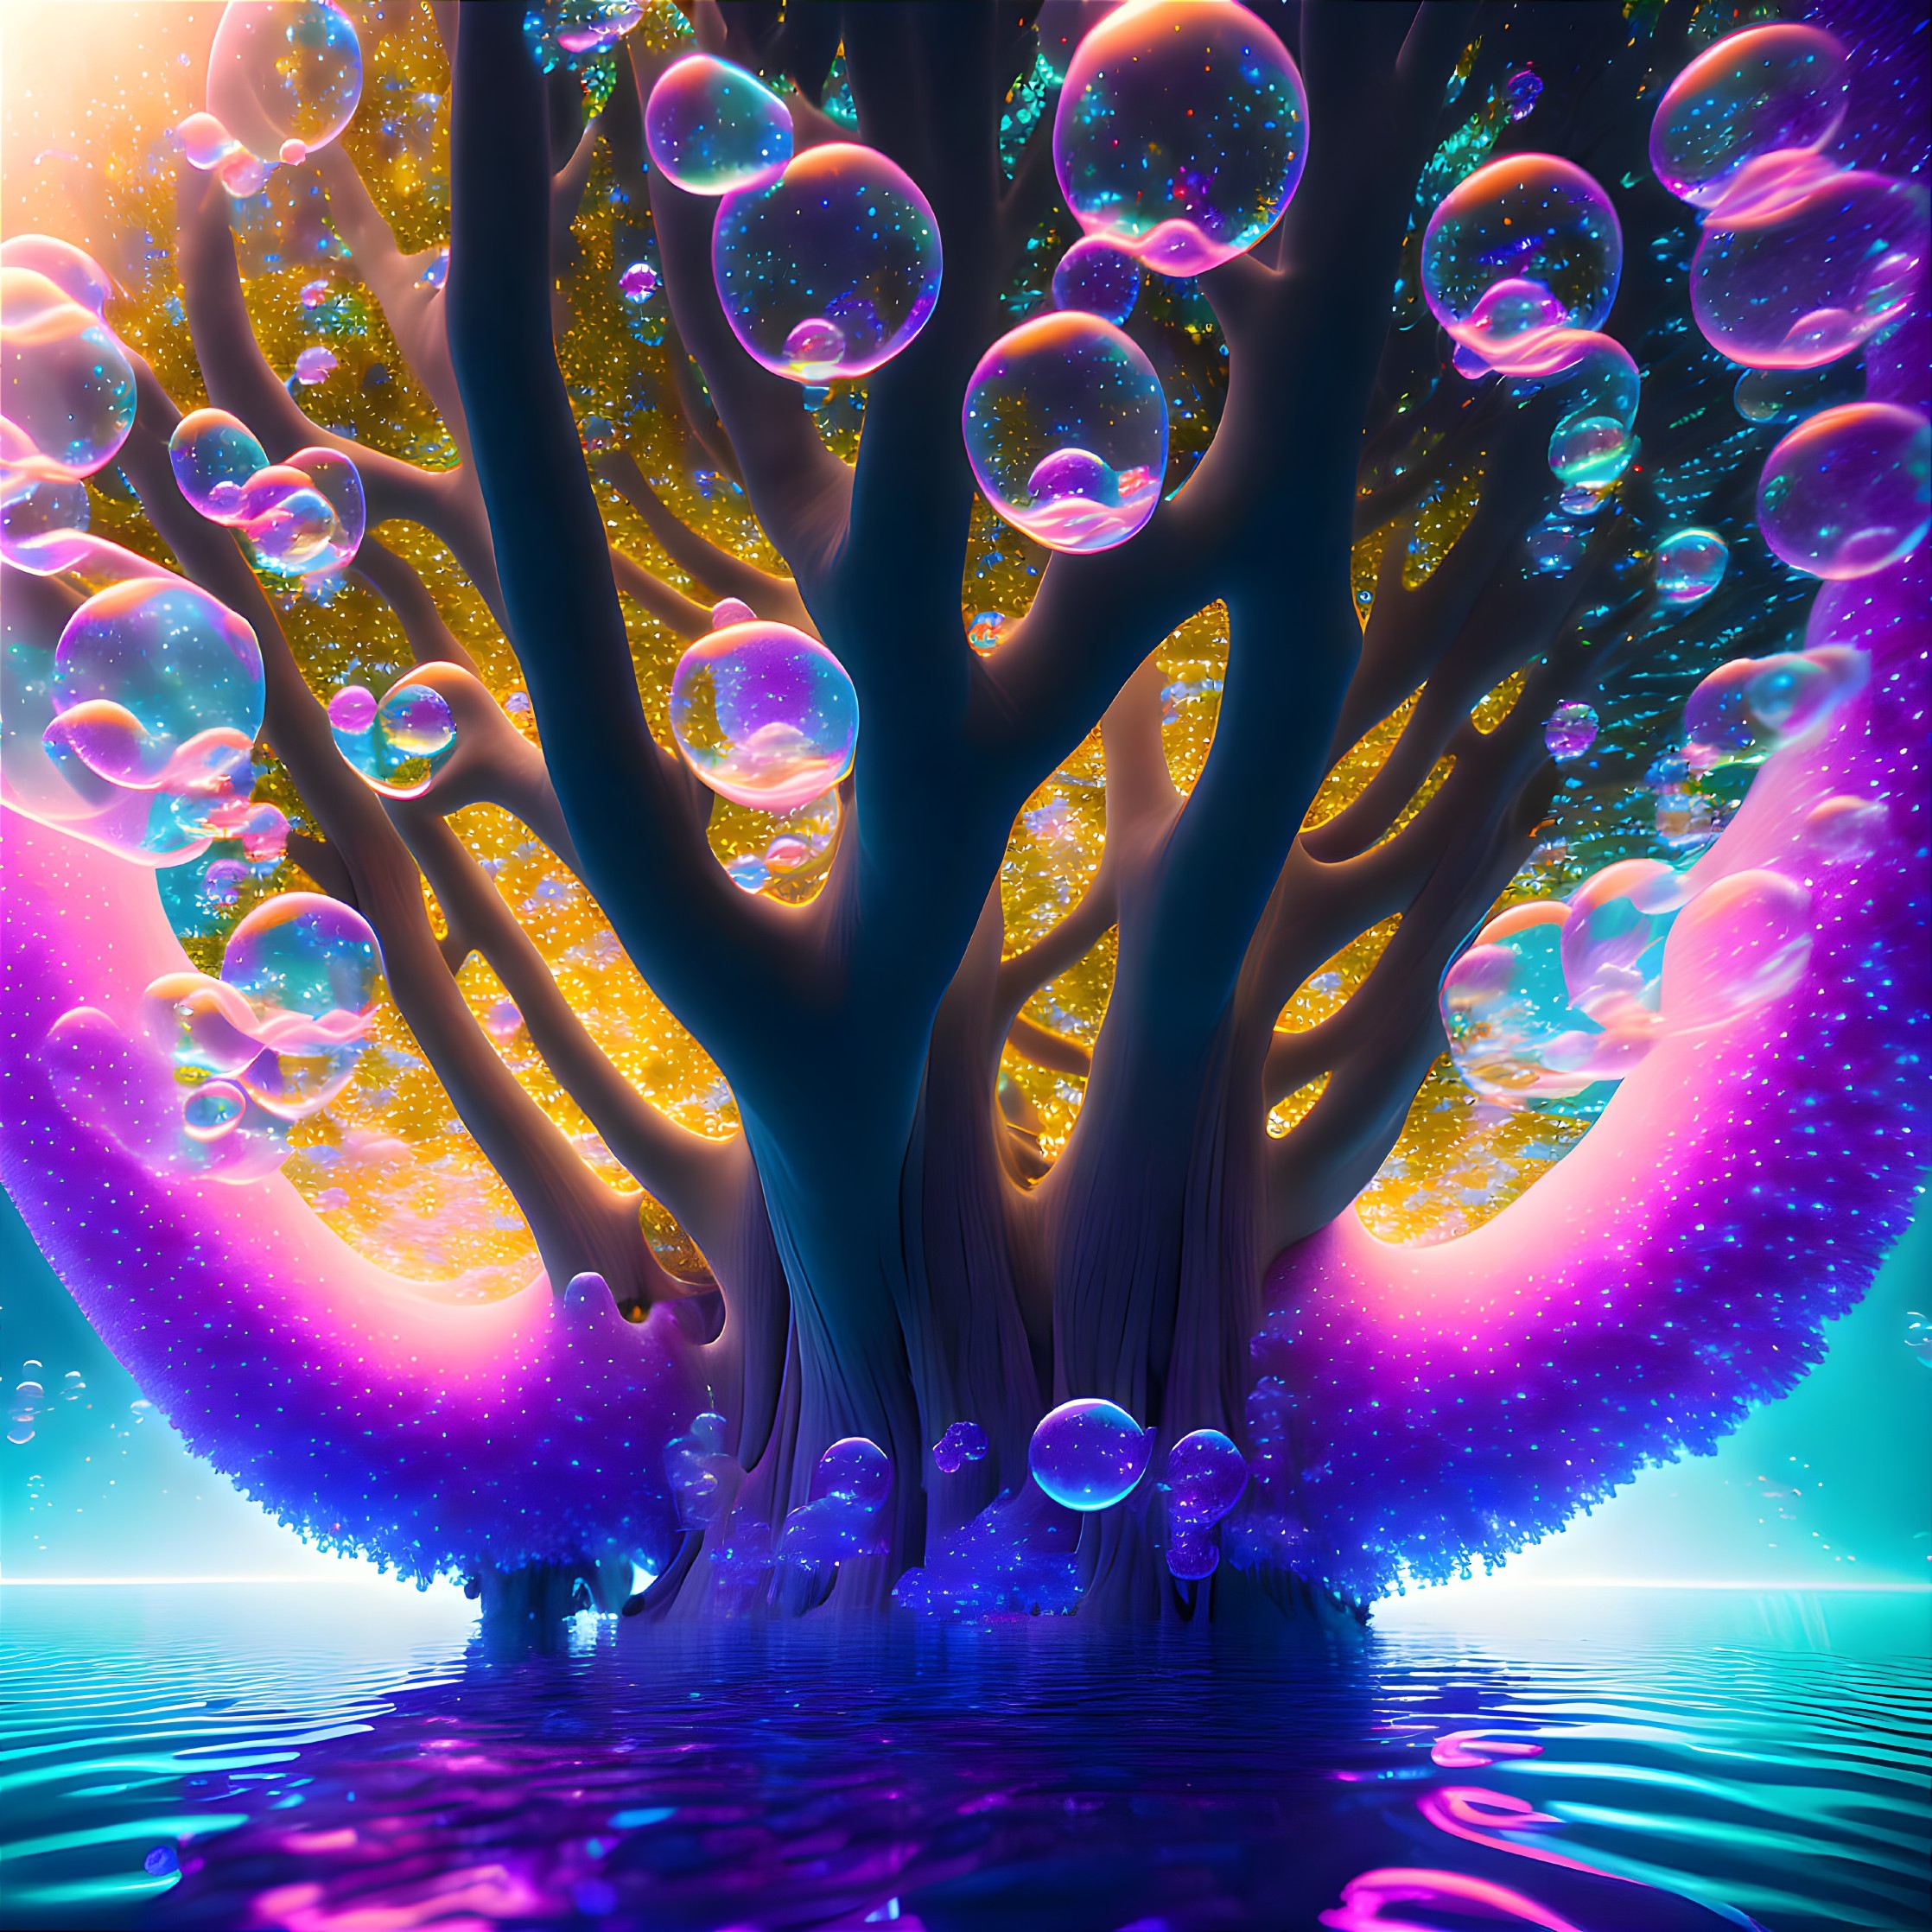 Ascension of souls at the glowing Tree of Life